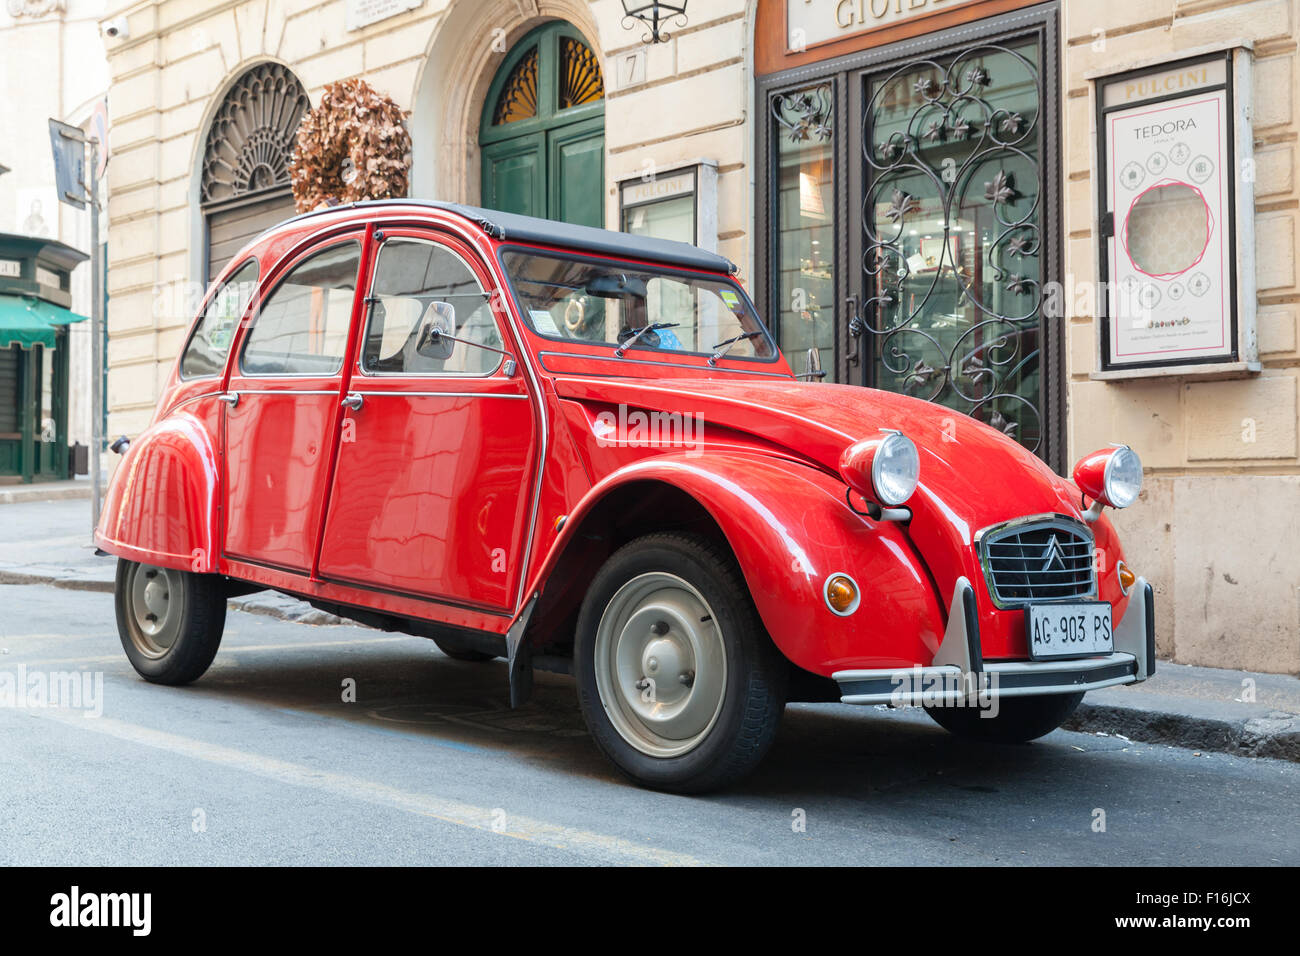 Rome, Italy - August 9, 2015: Red oltimer Citroen 2cv6 Special car stands parked on the city roadside Stock Photo